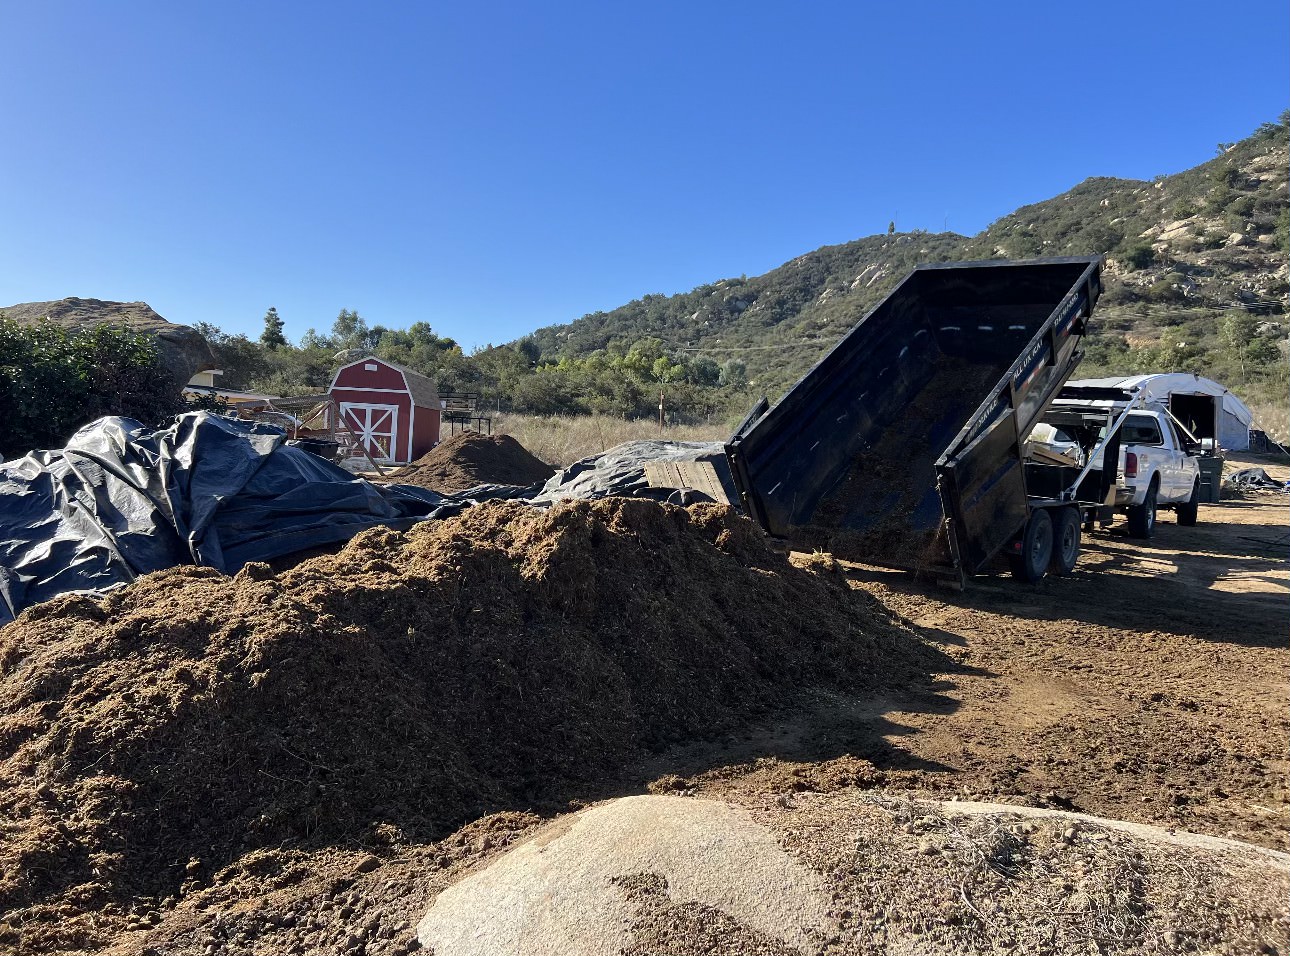 Manure disposal dumpster ready for agricultural waste in Riverside County